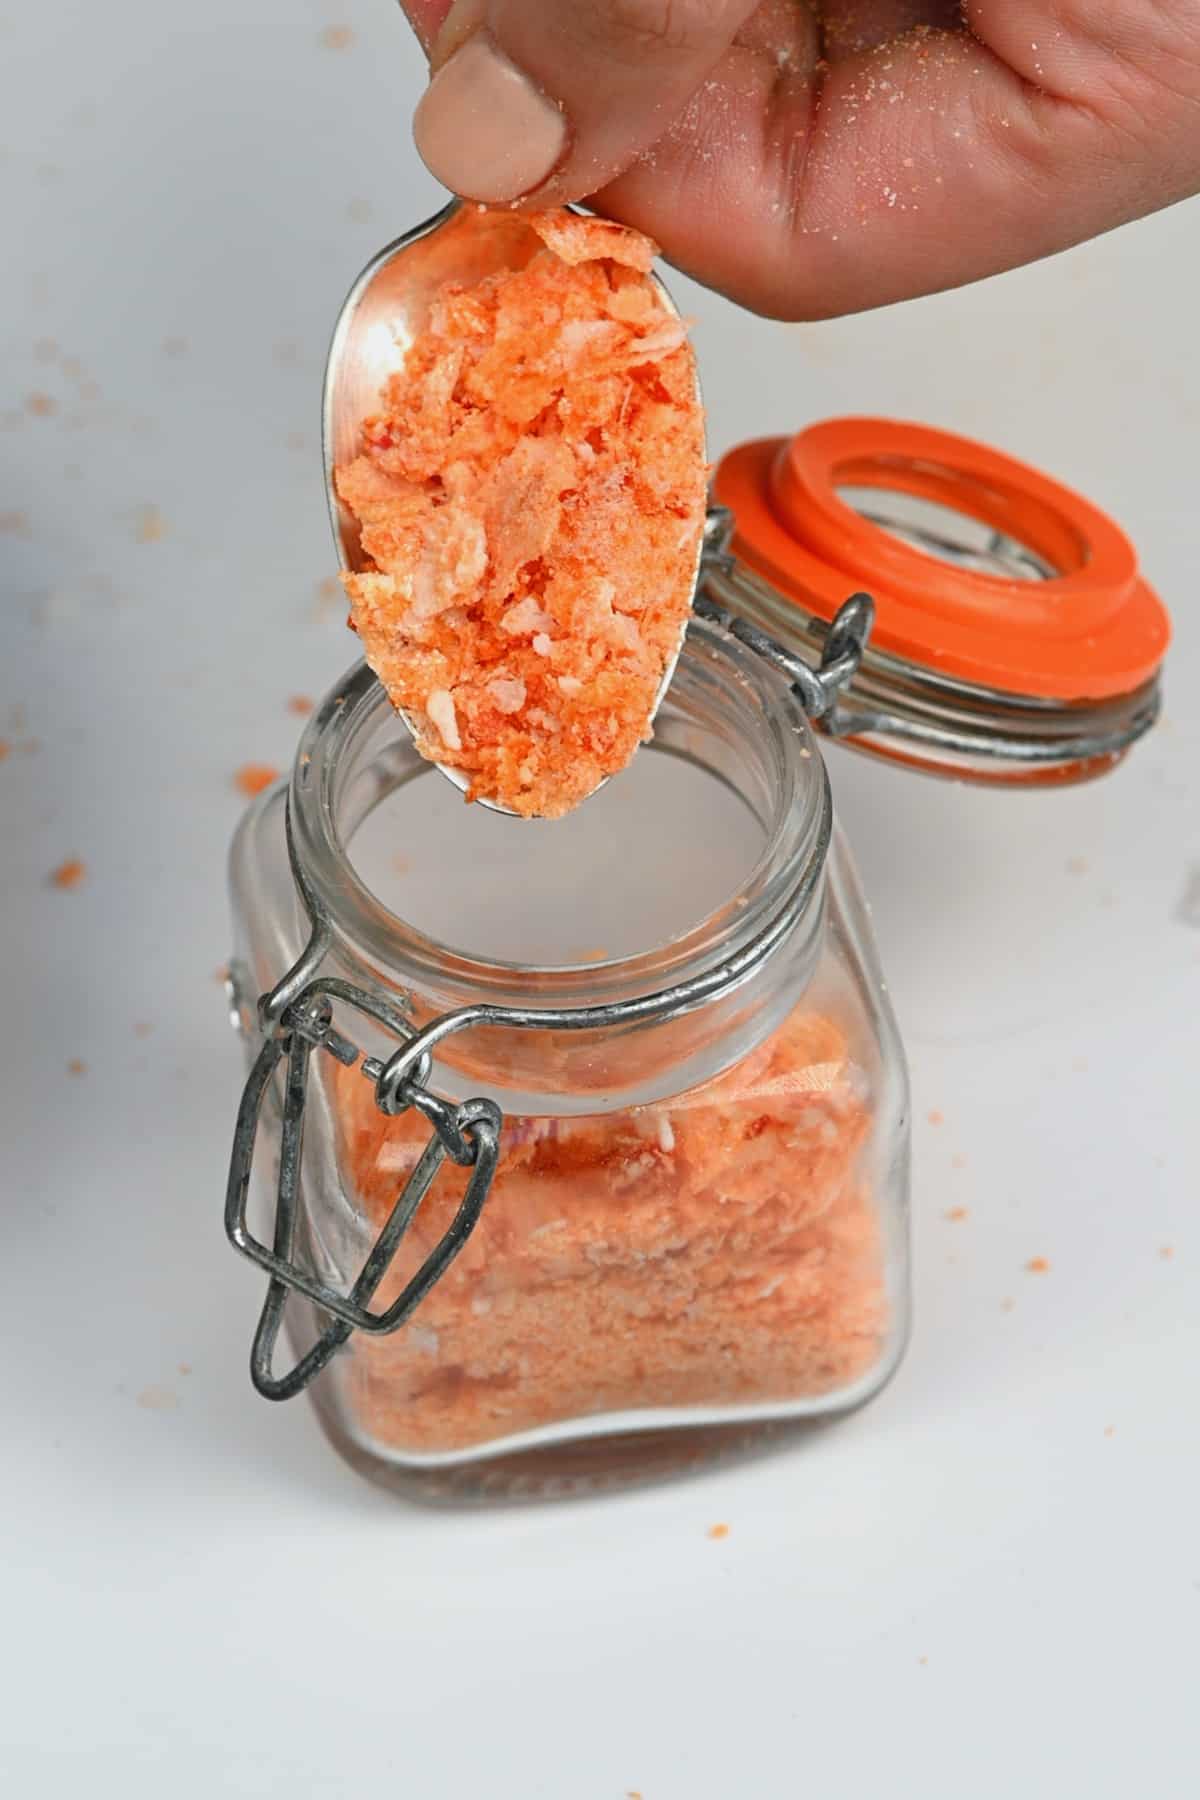 Filling a small jar with chili flaky salt